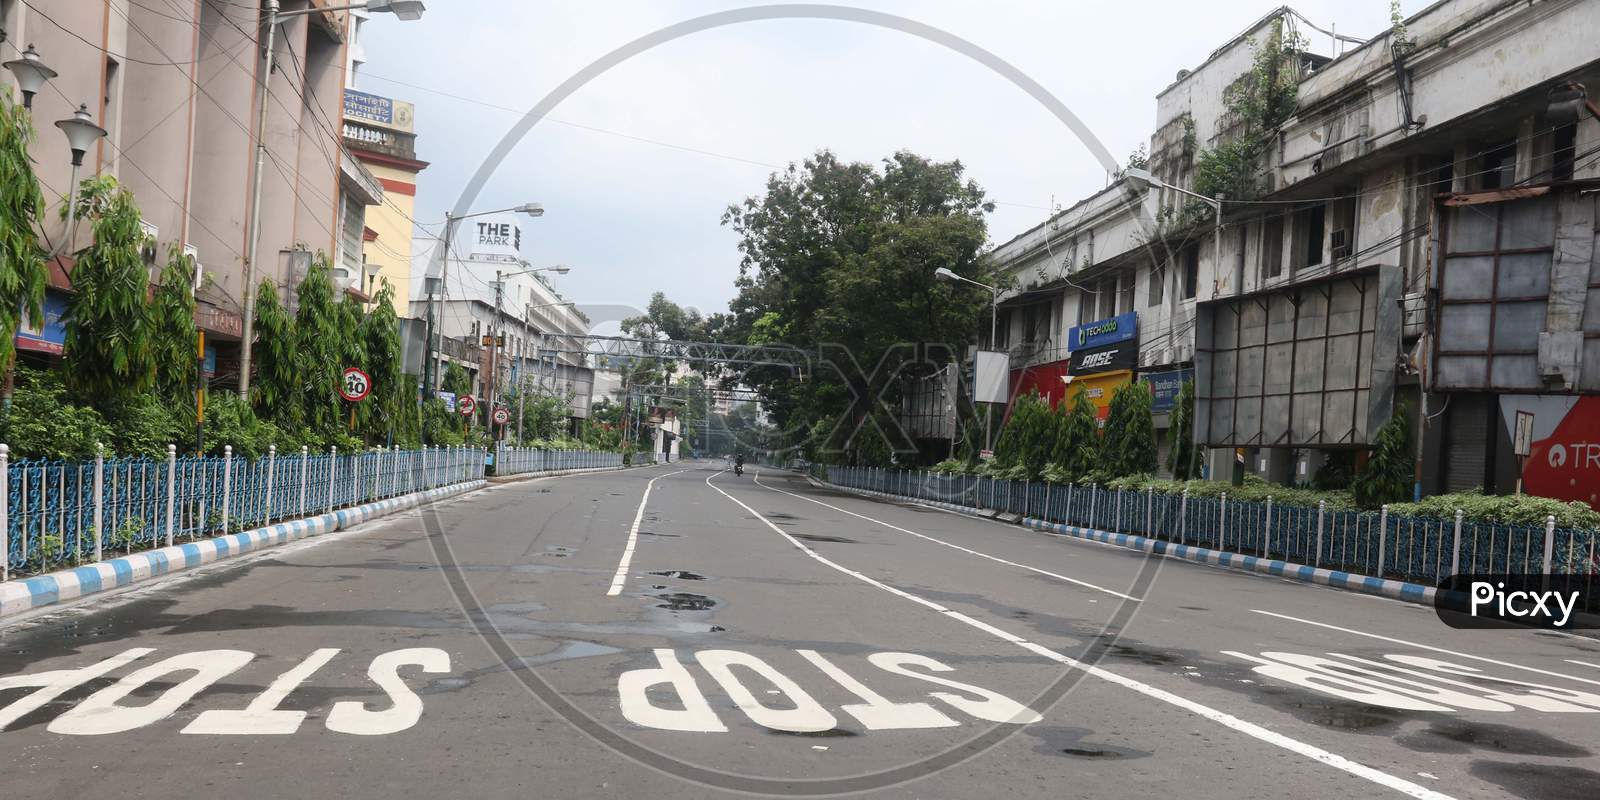 A street wears a deserted look amid the complete bi-weekly lockdown imposed by the government to curb Coronavirus spread in Kolkata on August 8, 2020